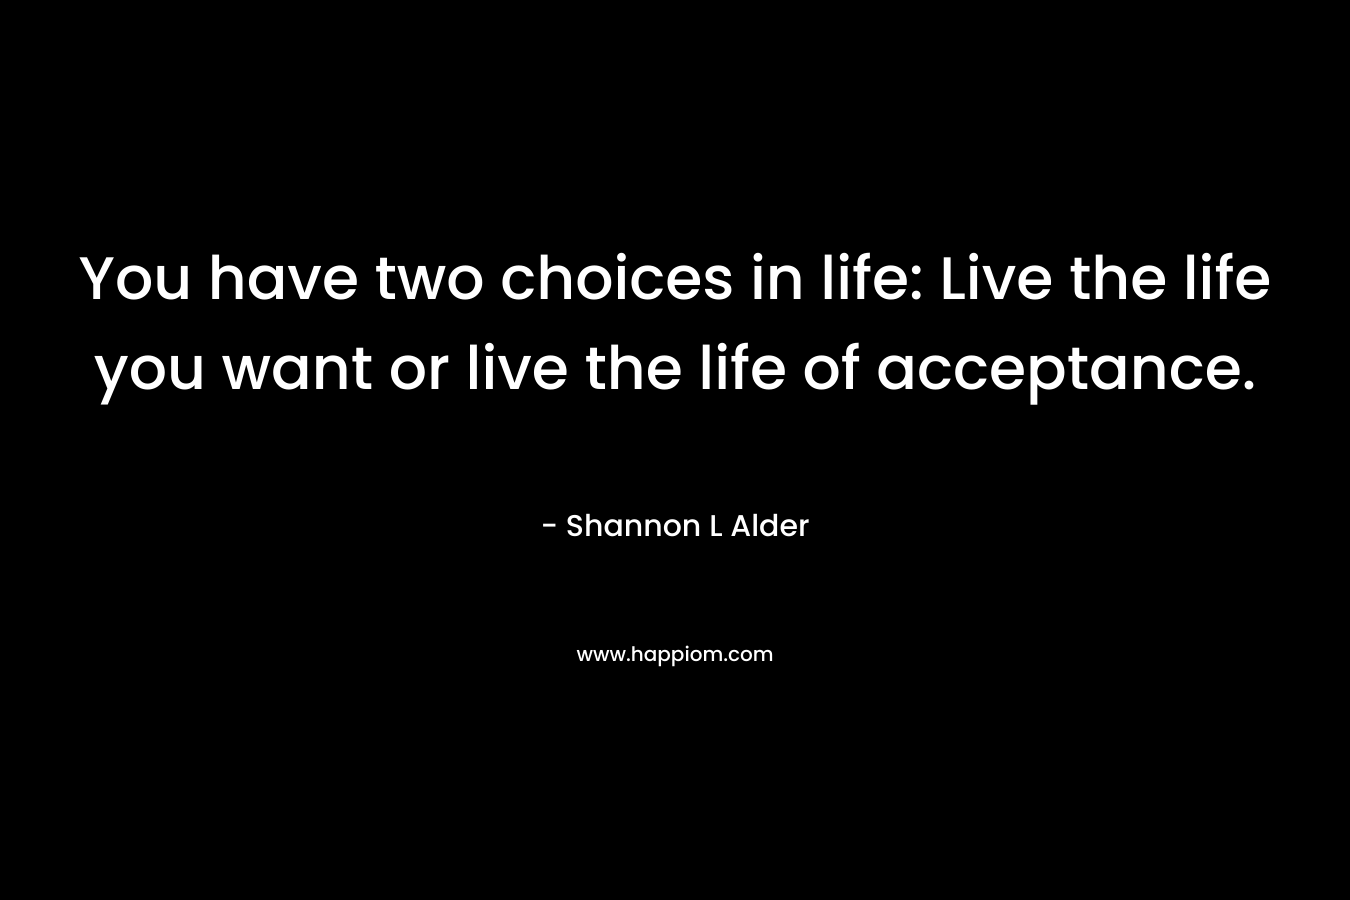 You have two choices in life: Live the life you want or live the life of acceptance.